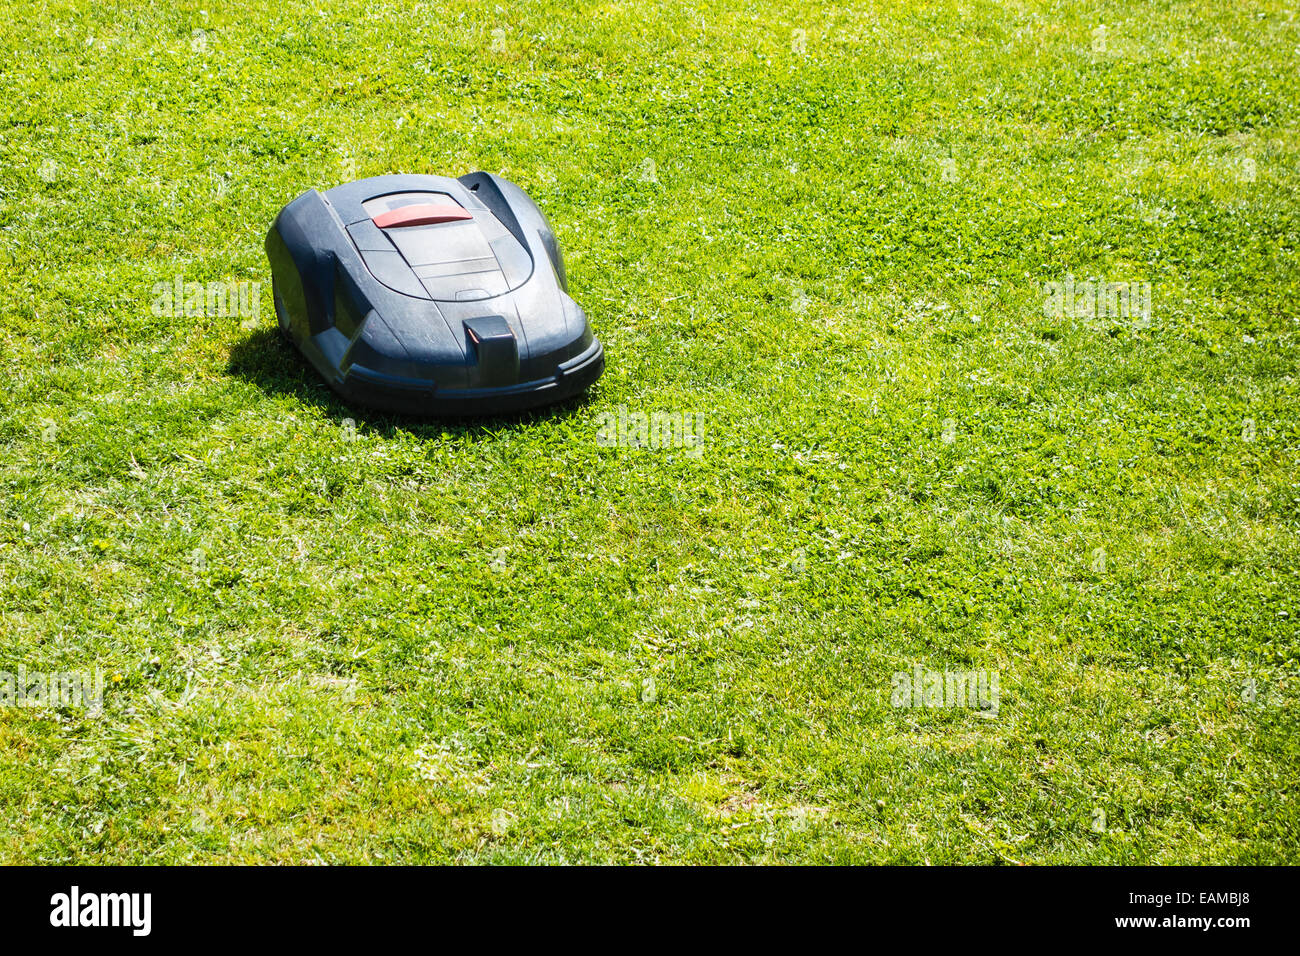 a robotic lawn mower working on a green grass field Stock Photo